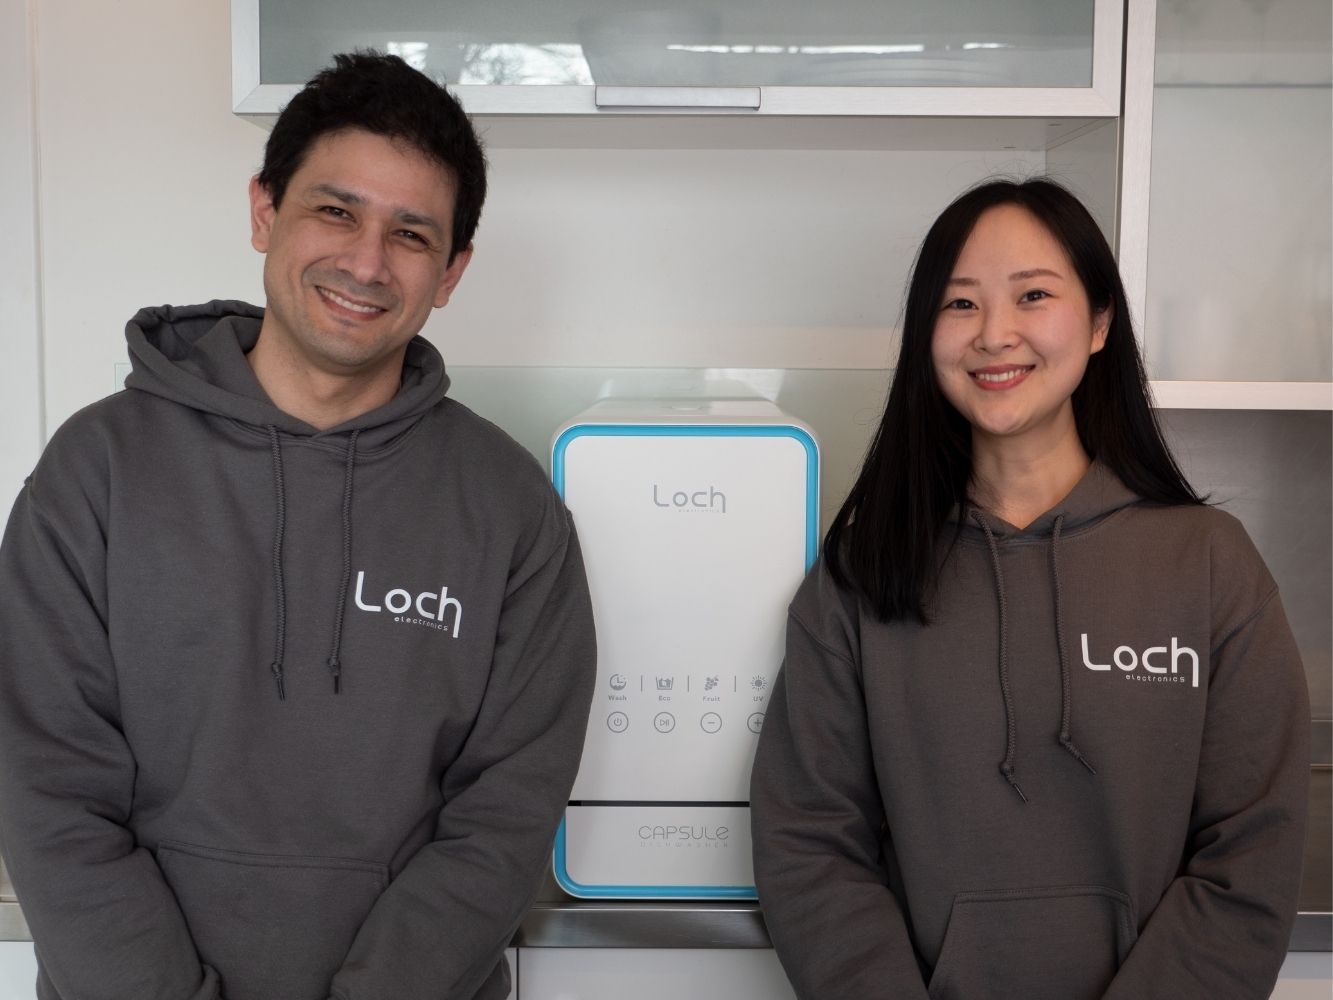 Loch Electronics founders pose with the Capsule Dishwasher